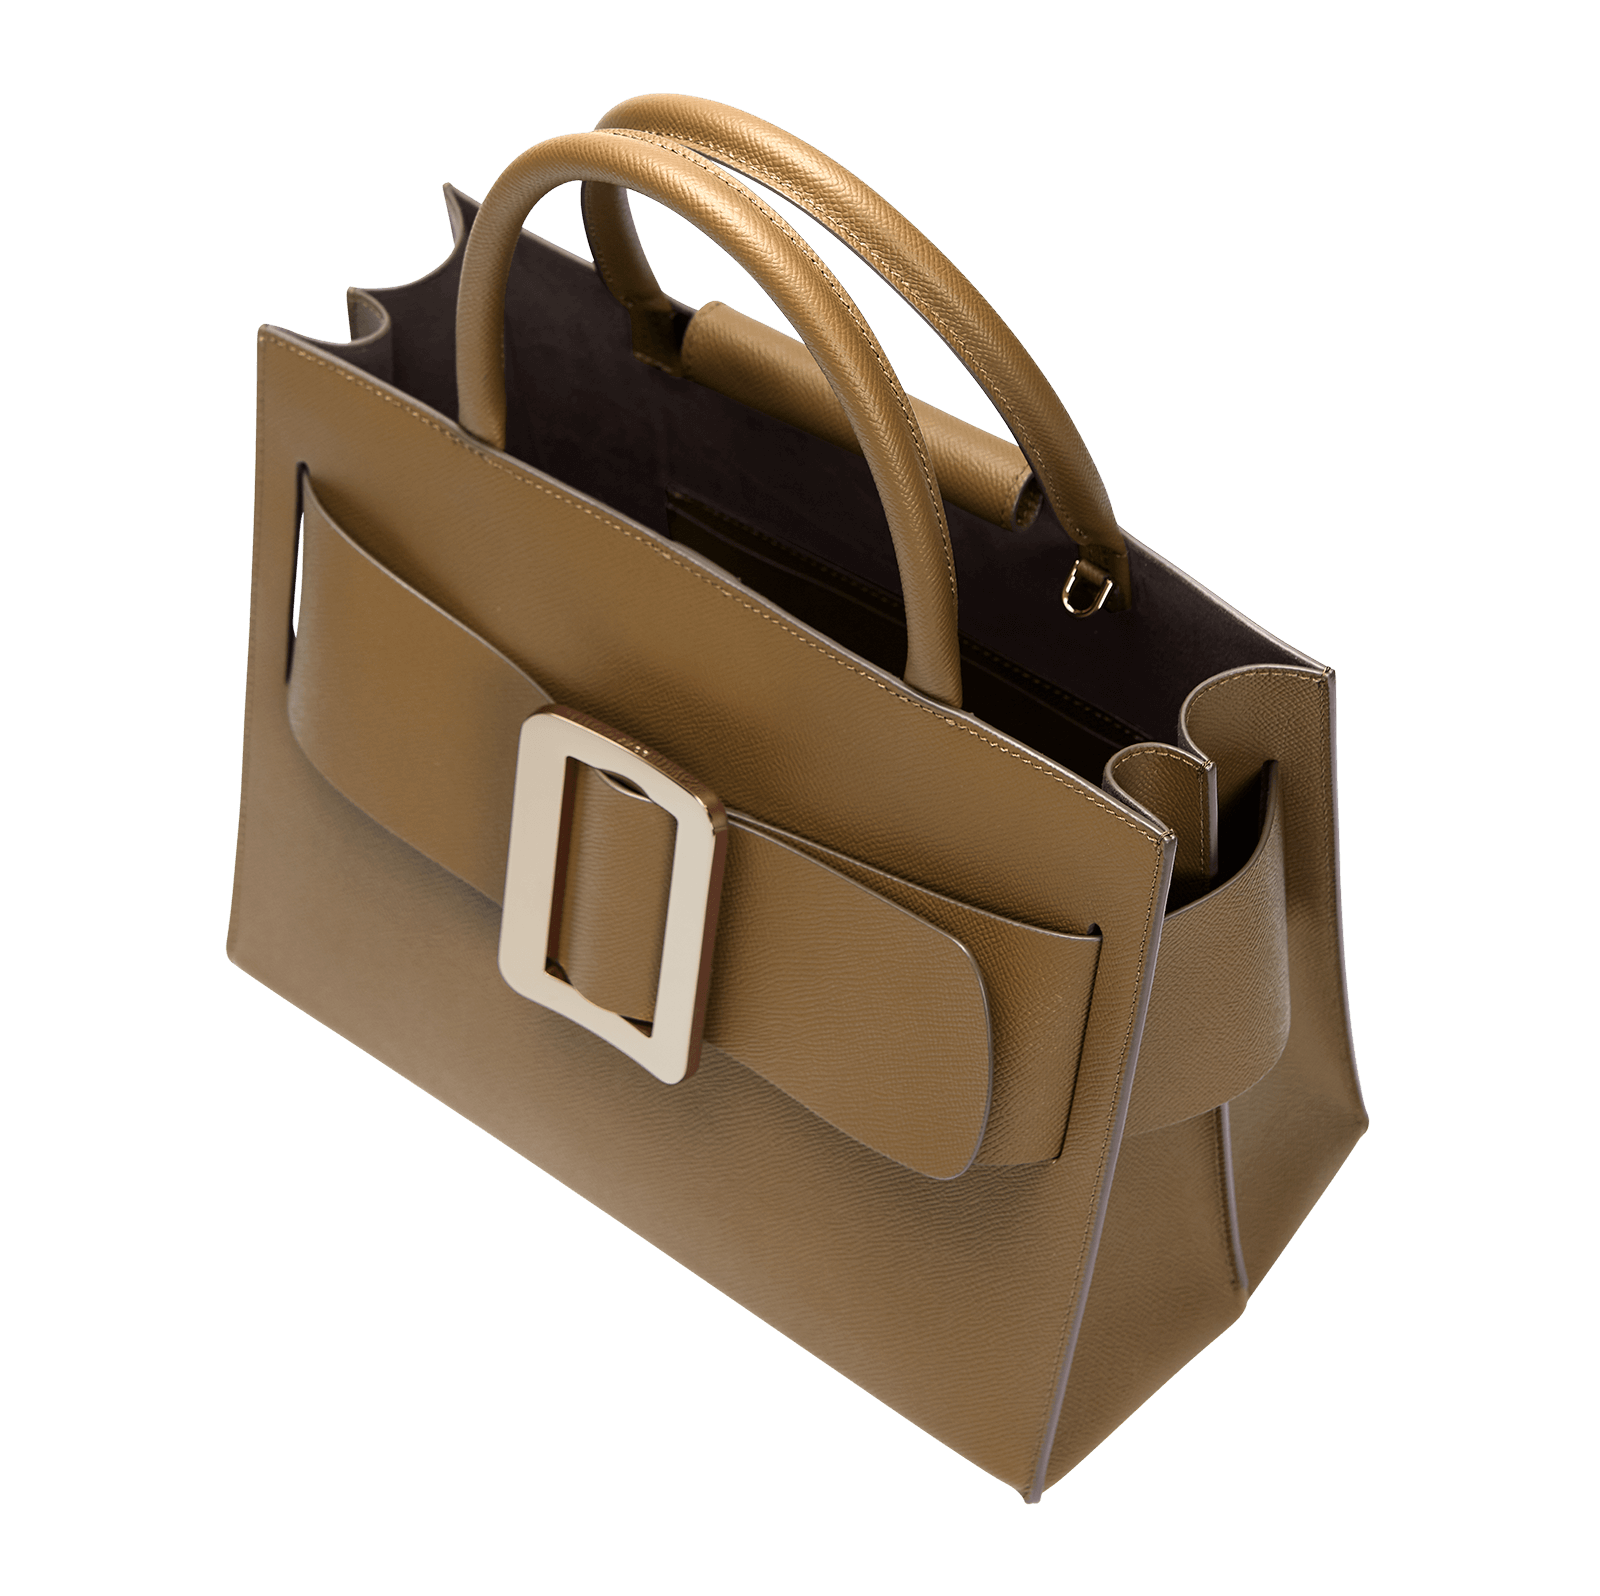 Large, structured brown handbag with a large gold buckle on the front, carry strap, and twin handles. Made with grained calfskin leather.